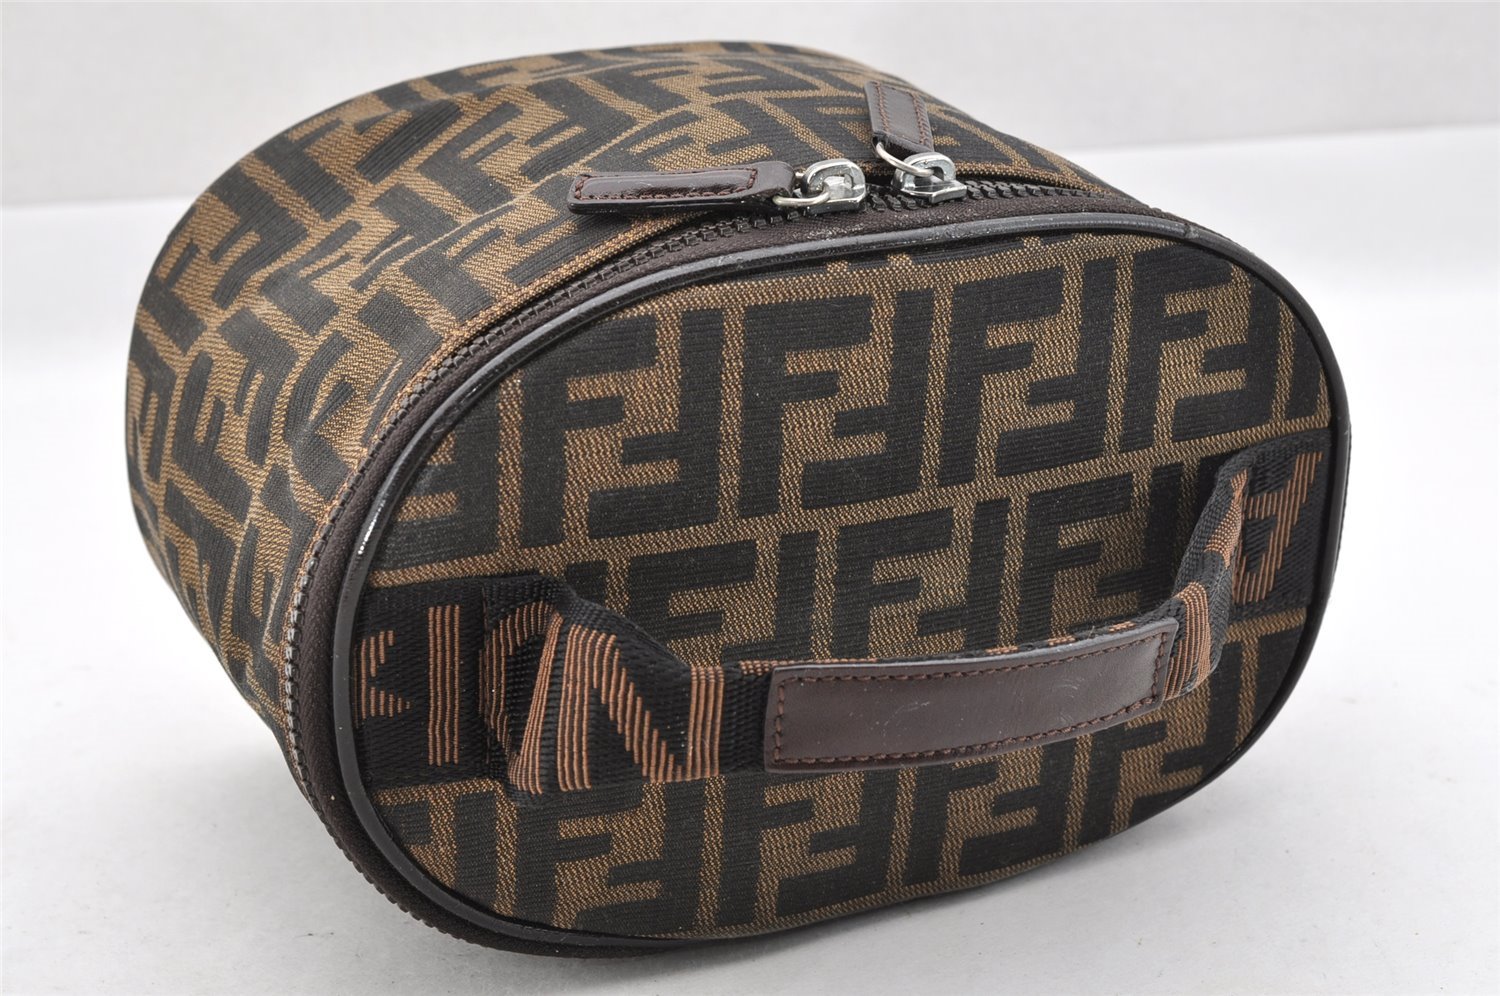 Authentic FENDI Zucca Vanity Bag Pouch Purse Canvas Leather Brown Junk 4000I